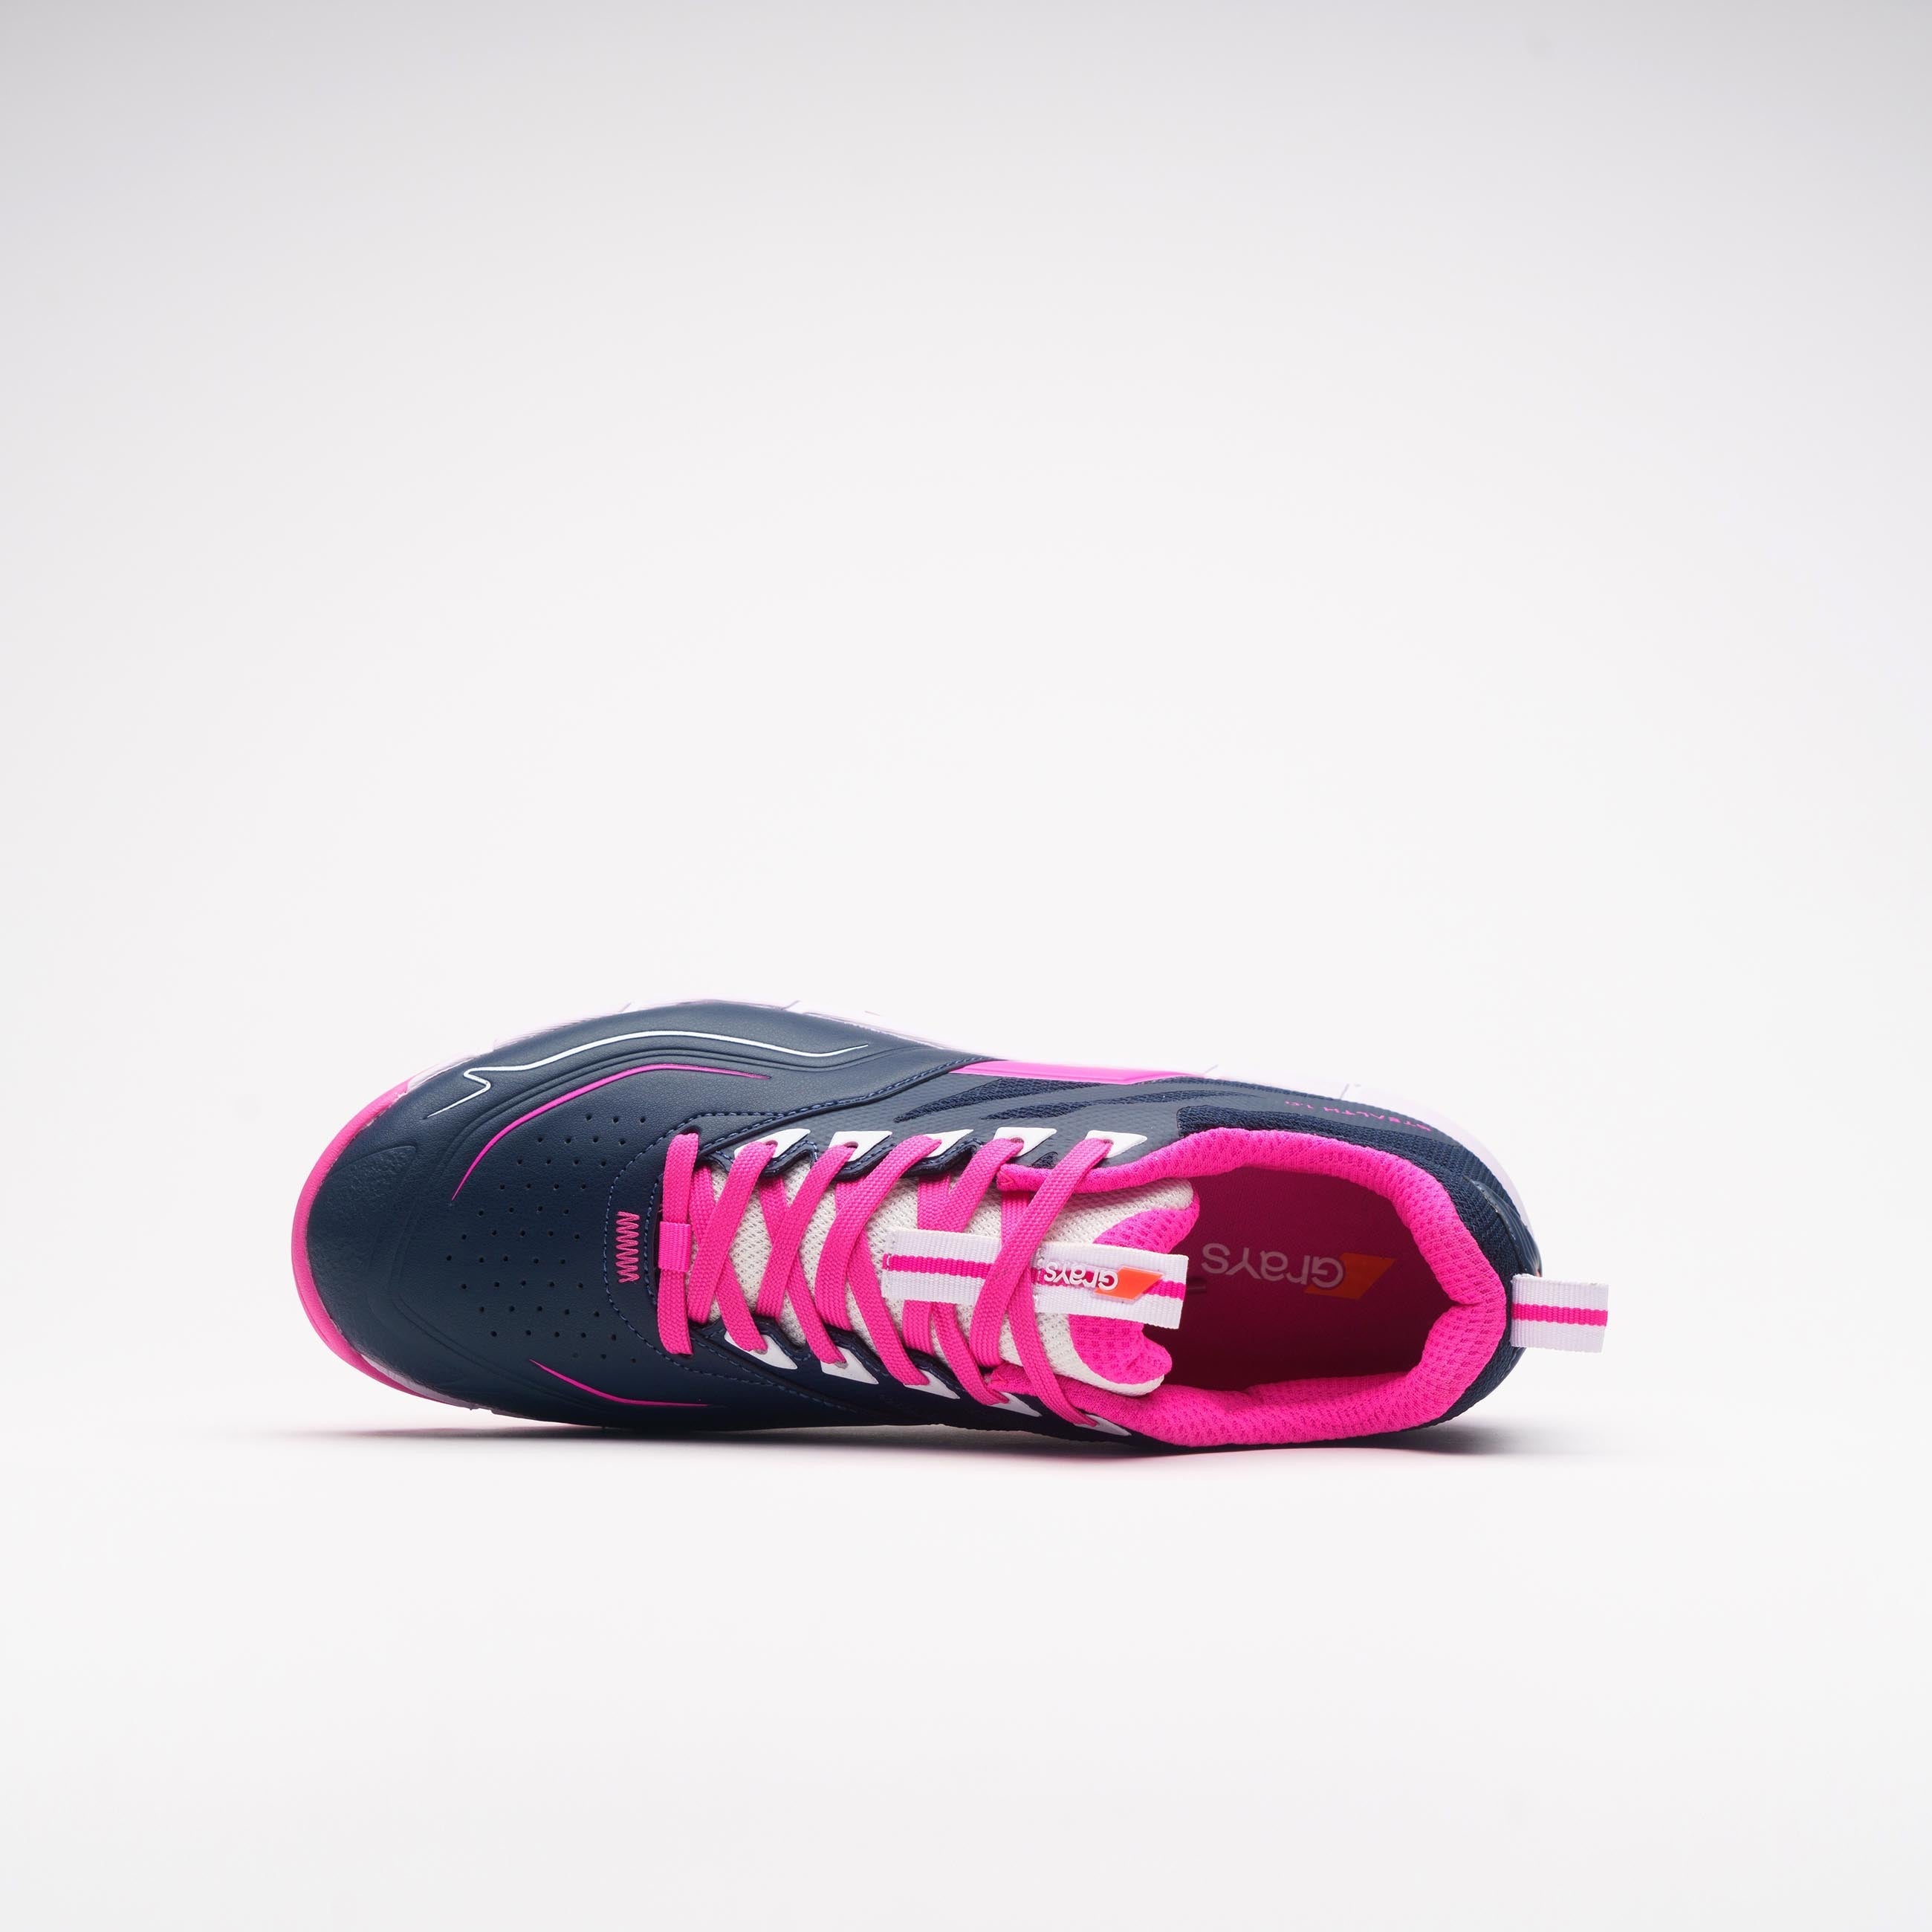 HSEG24Shoes Stealth 1.0 Navy Pink, Top